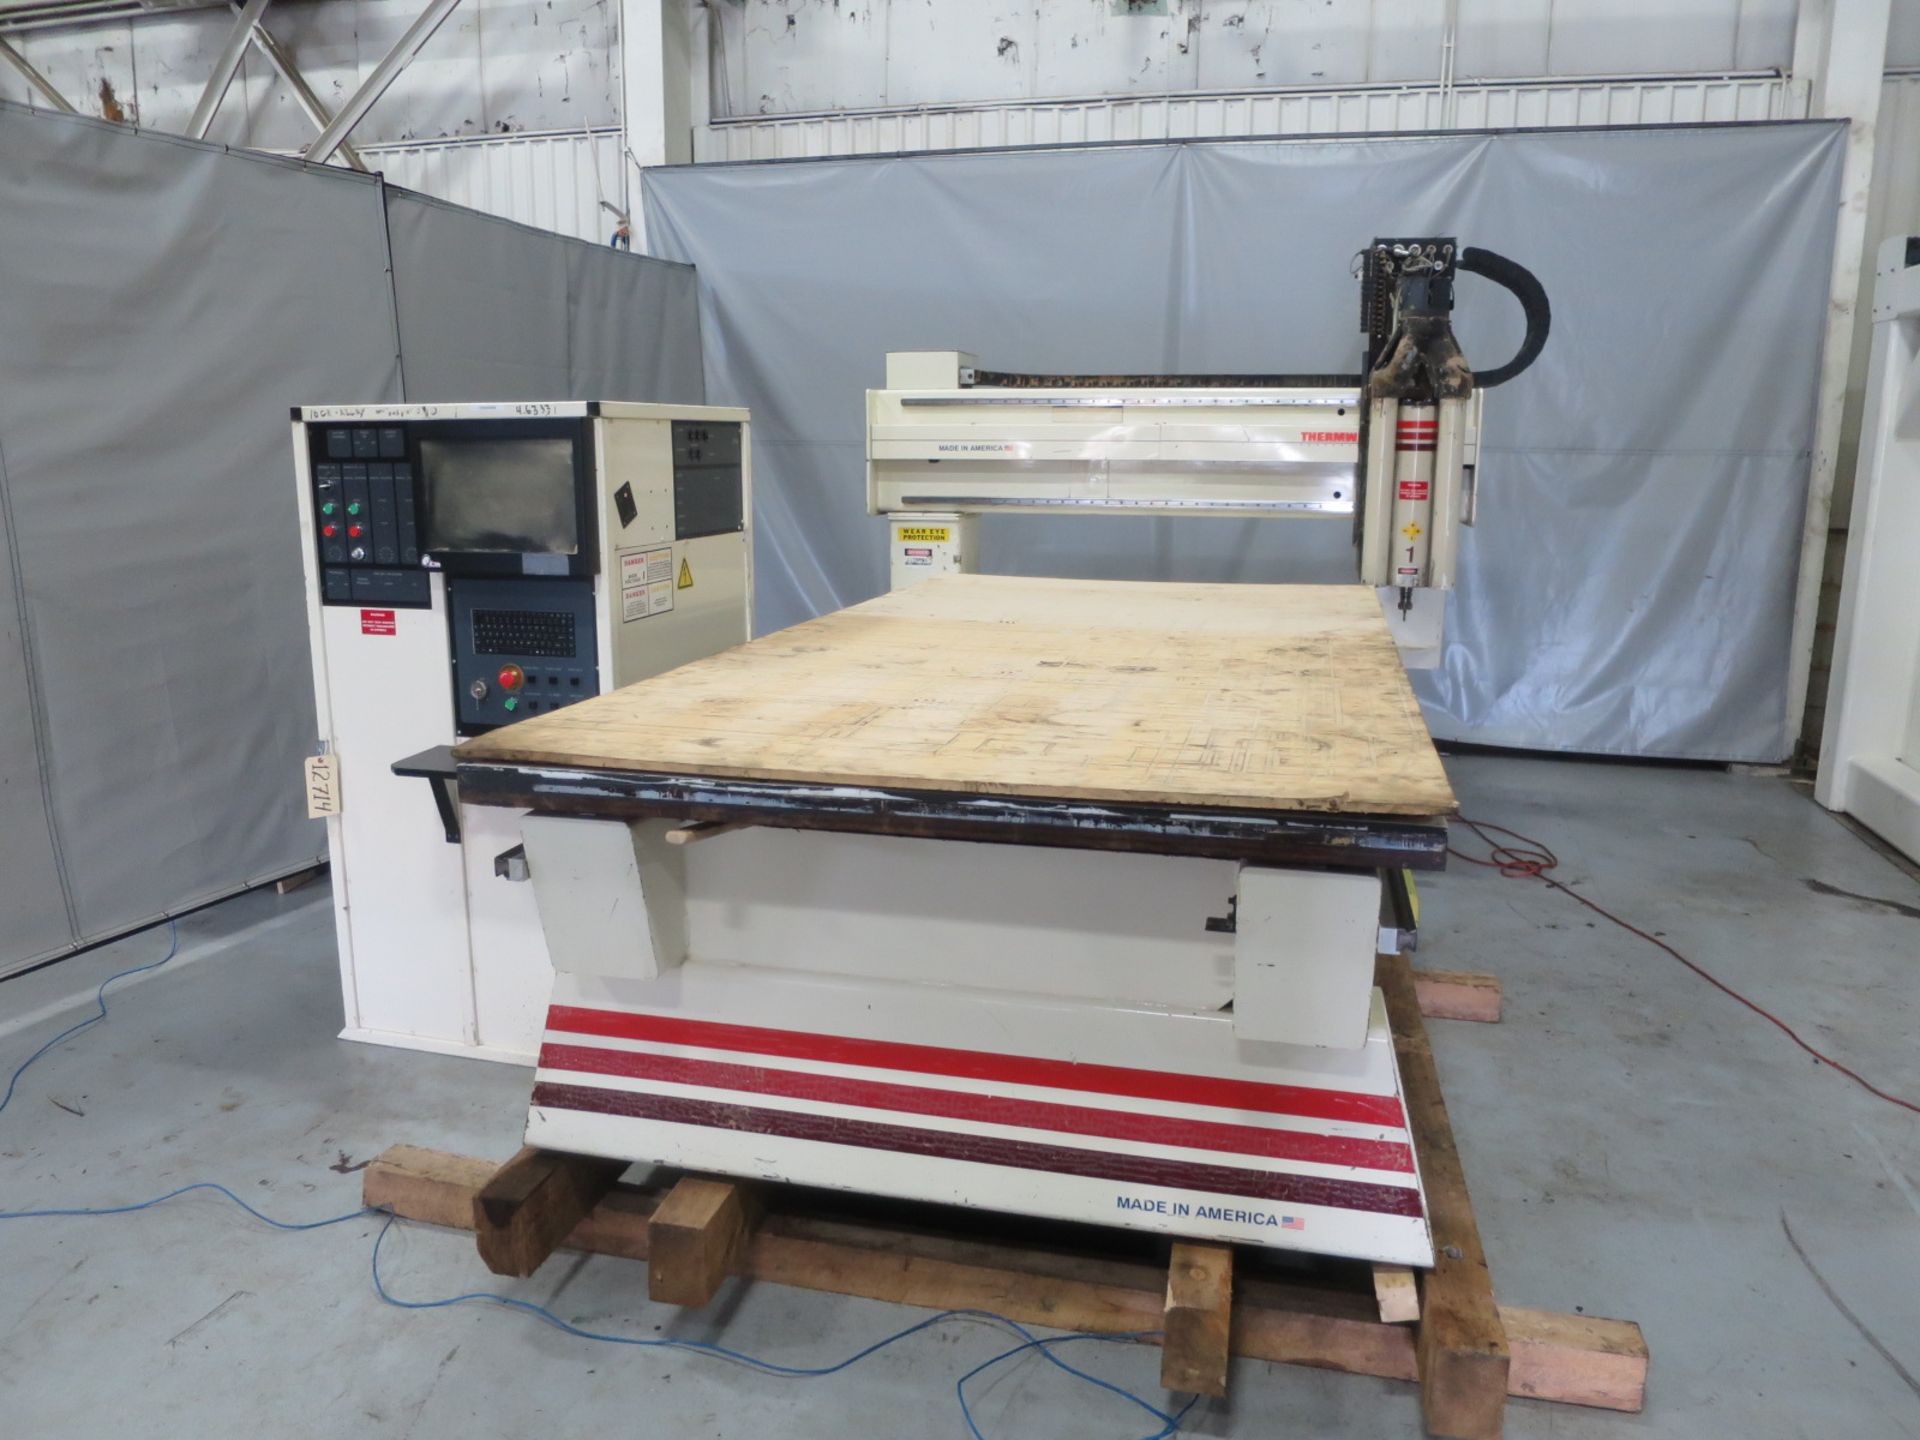 5'X'10' THERMWOOD MODEL C-53 3-AXIS CNC ROUTER W/QCORE UPGRADE, S/N C530A rigging fee of $550.00 wil